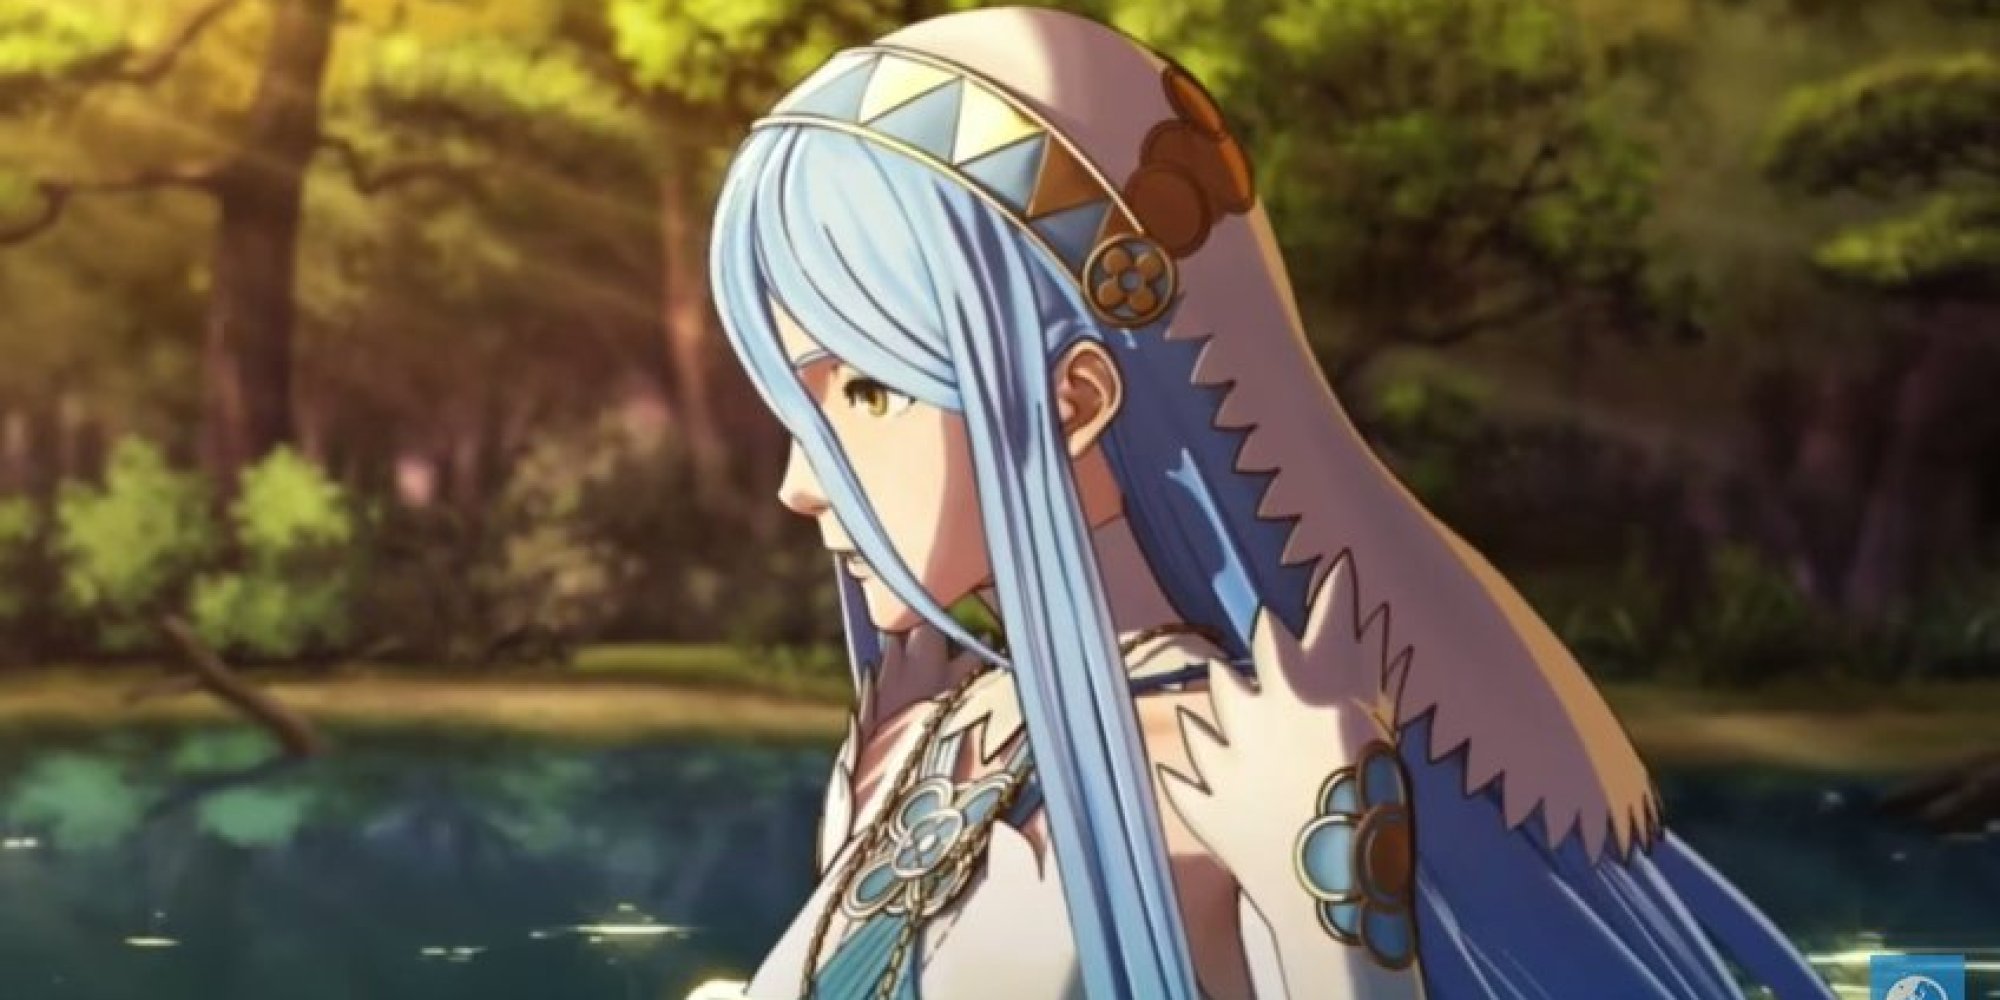 Nintendo Will Allow Same Sex Relationships In New Fire Emblem Game